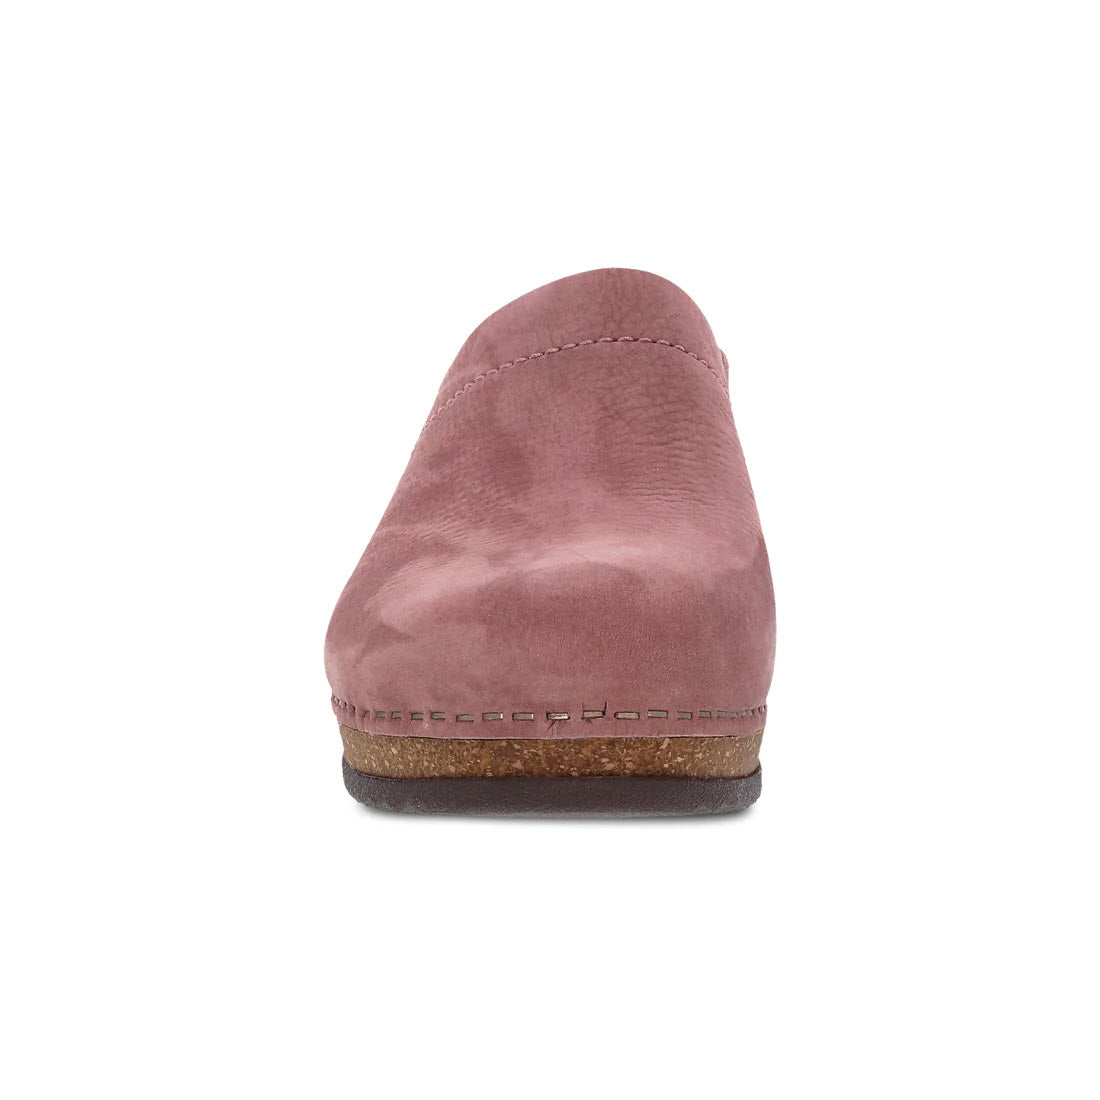 Front view of a single pink suede Dansko Mariella Rose open back clog with stitching details.